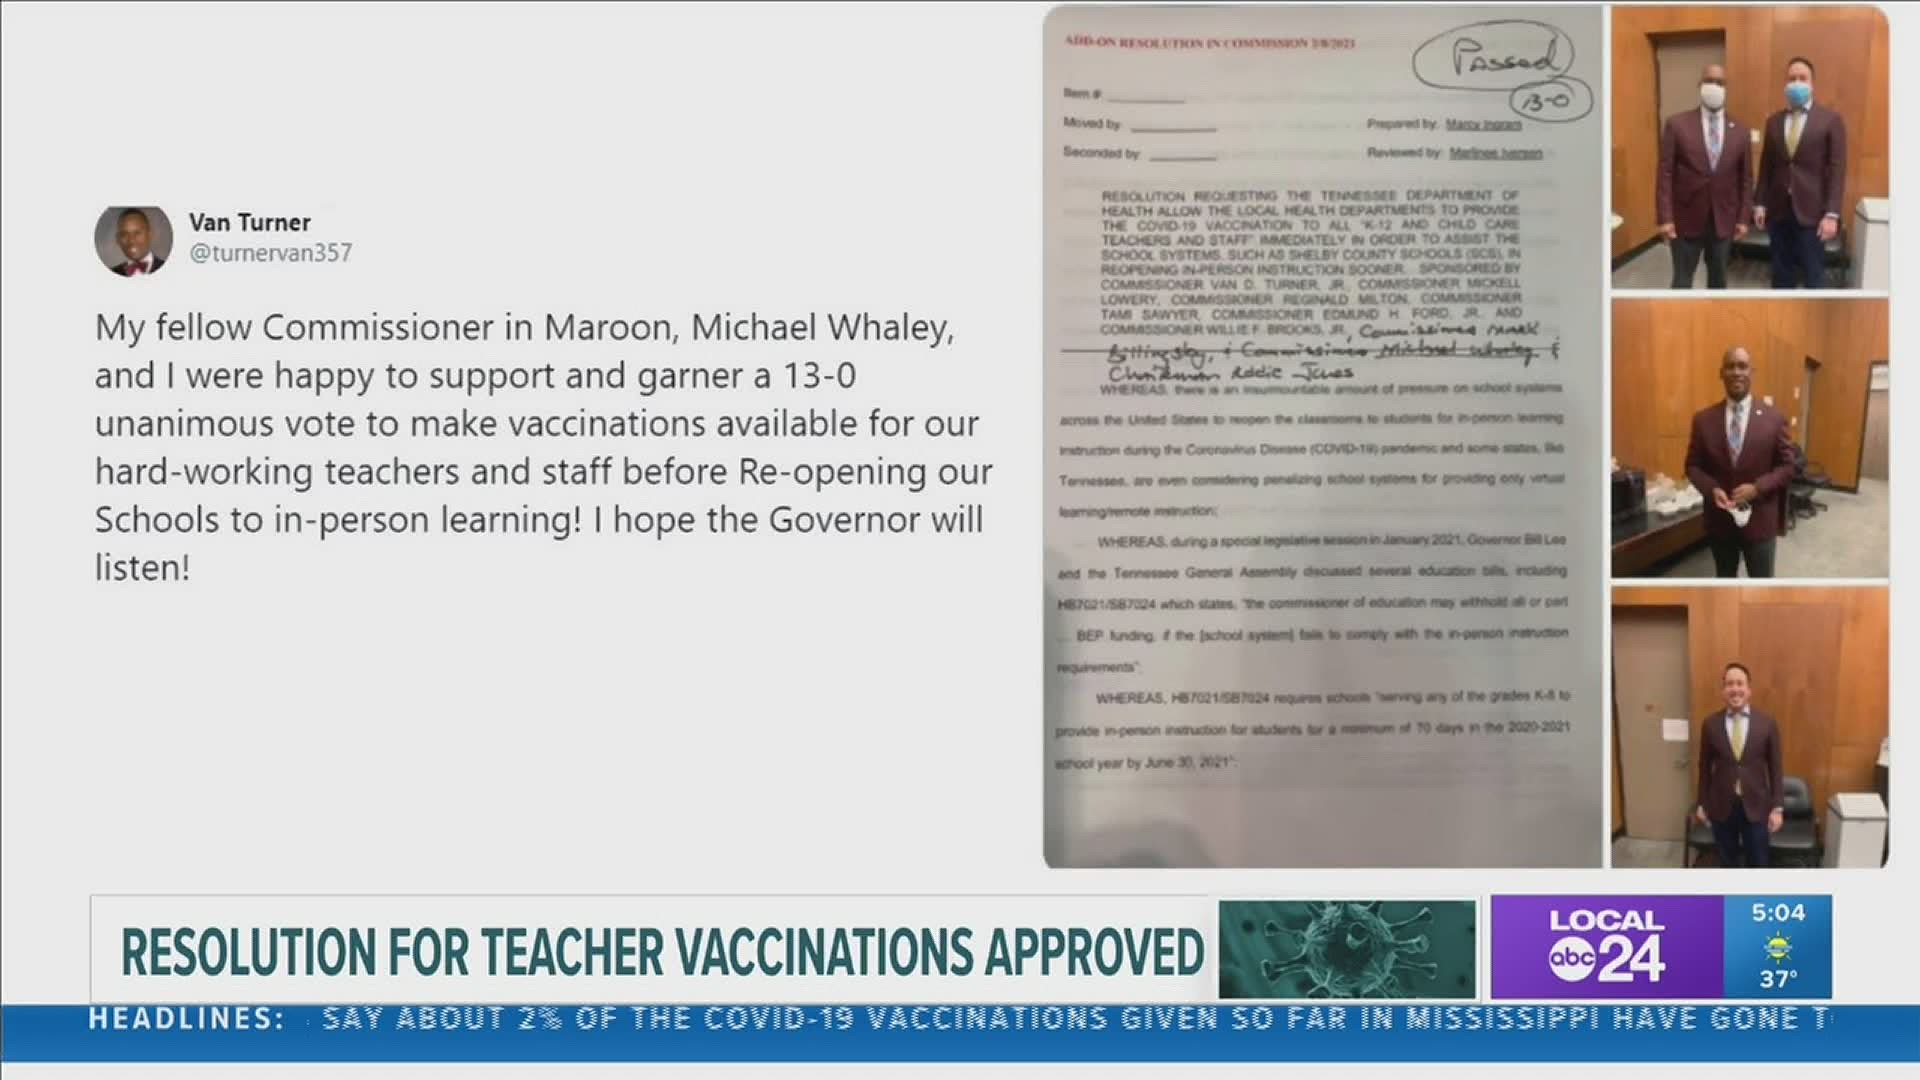 Commissioners voted for a resolution calling on the Tennessee Department of Health to approve immediate COVID-19 vaccinations for educators.